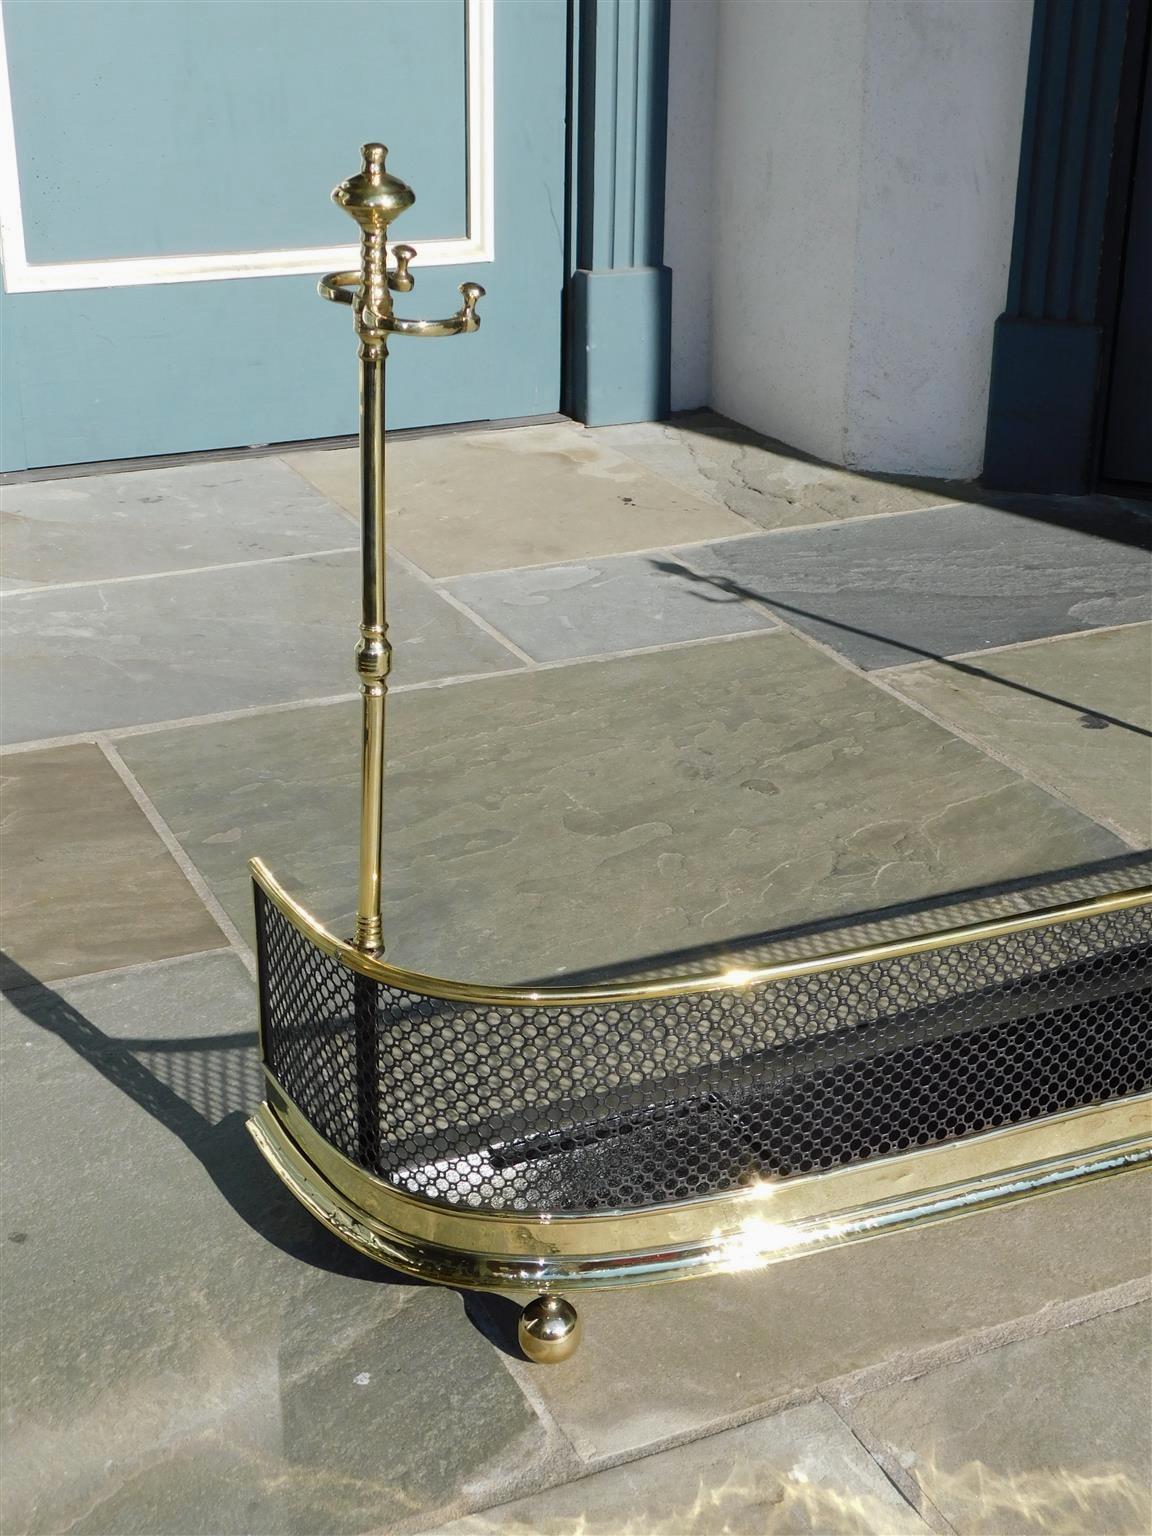 English Brass and Polished Steel Pierced Gallery Fire Place Fender, Circa 1810 For Sale 2